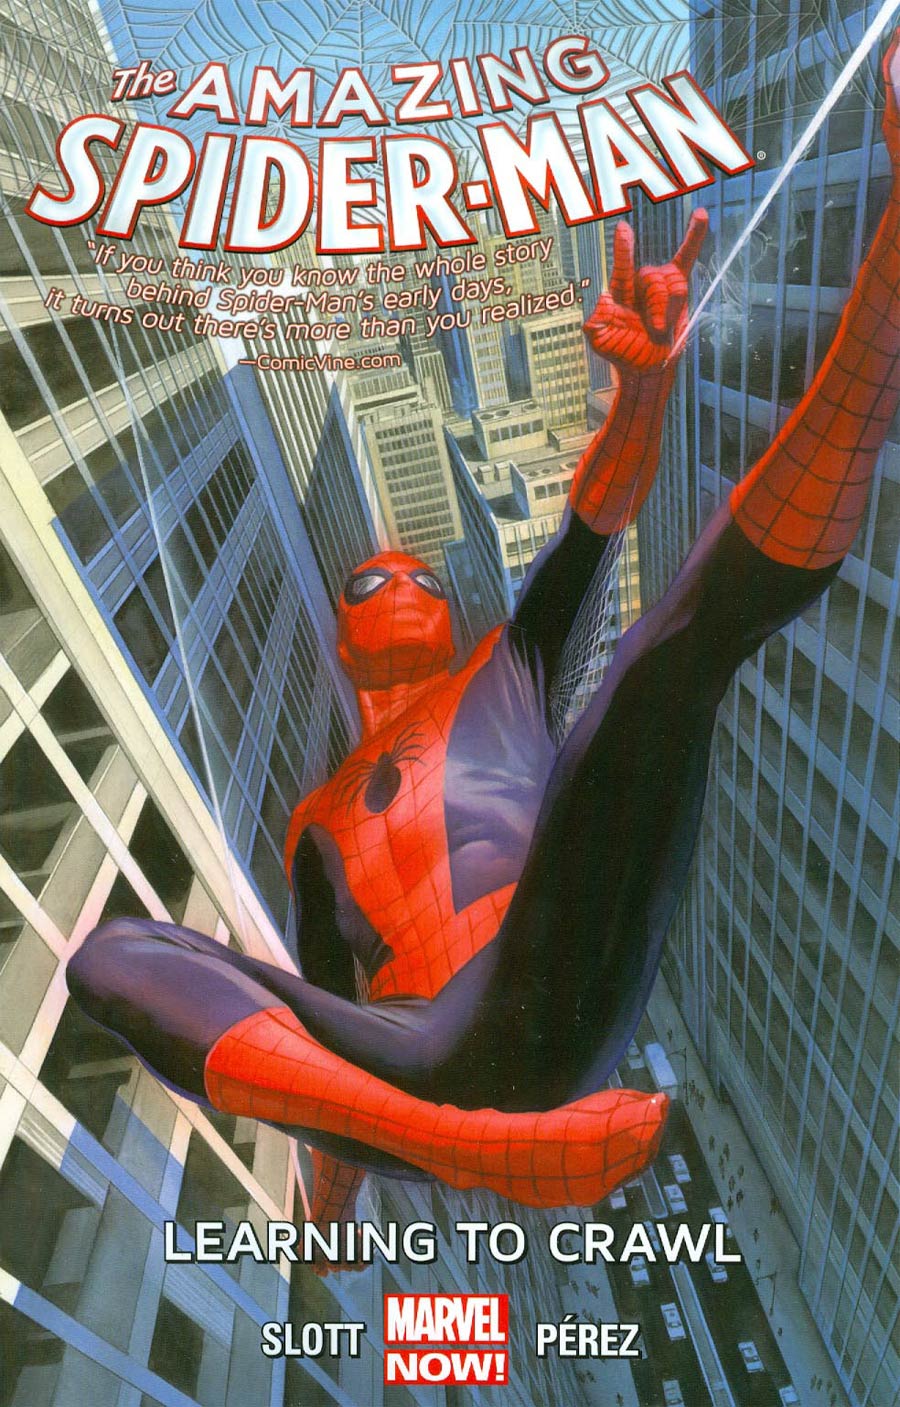 Amazing Spider-Man Vol 1.1 Learning To Crawl TP